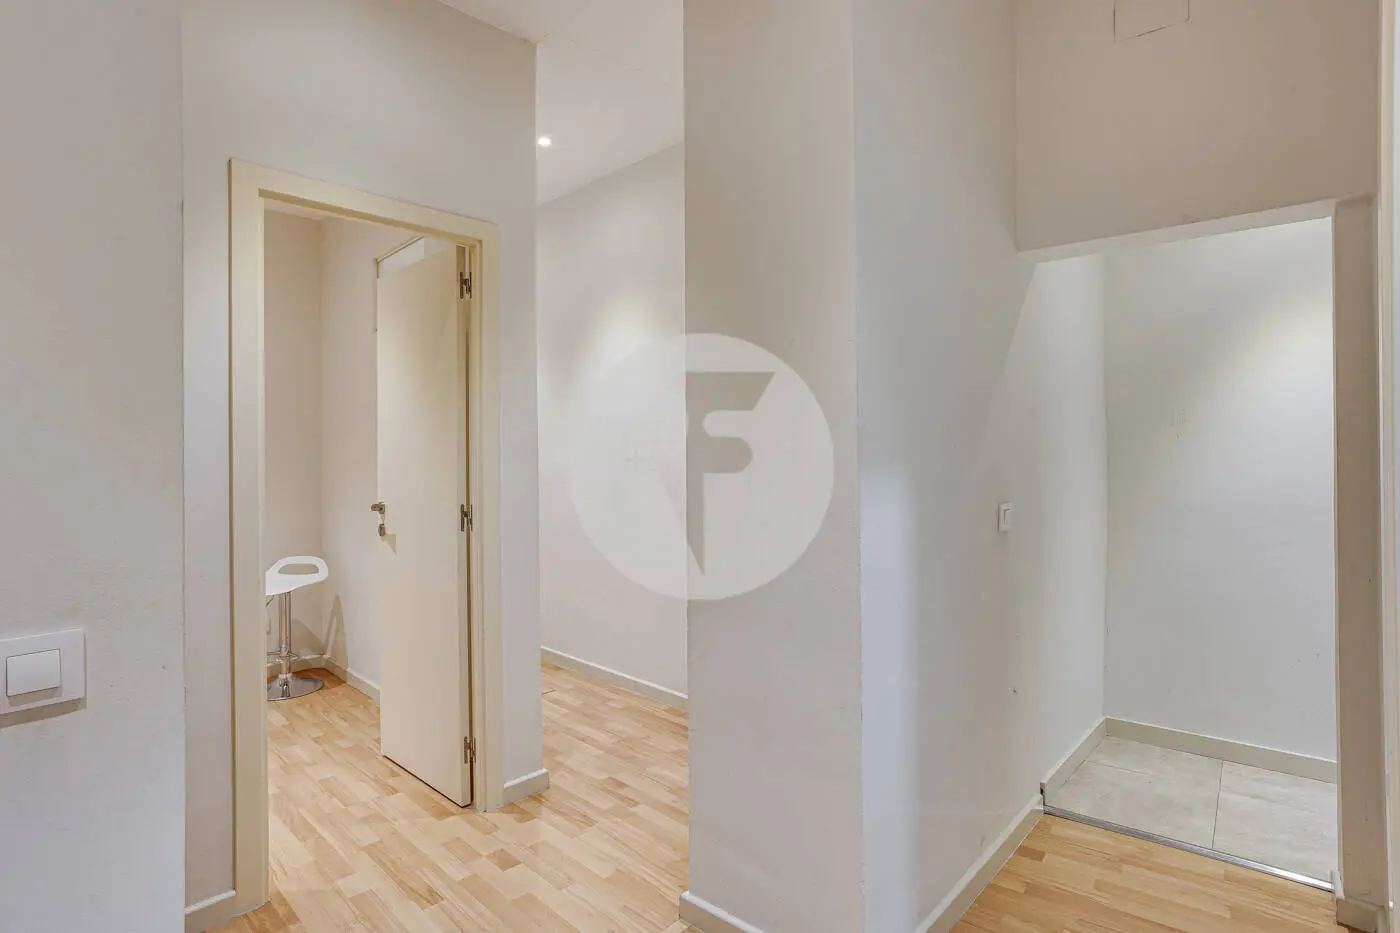 Magnificent apartment for sale next to Pl Universitat of 114m2 according to the land registry, located on Tallers Street in the Ciutat Vella neighborhood of Barcelona 11